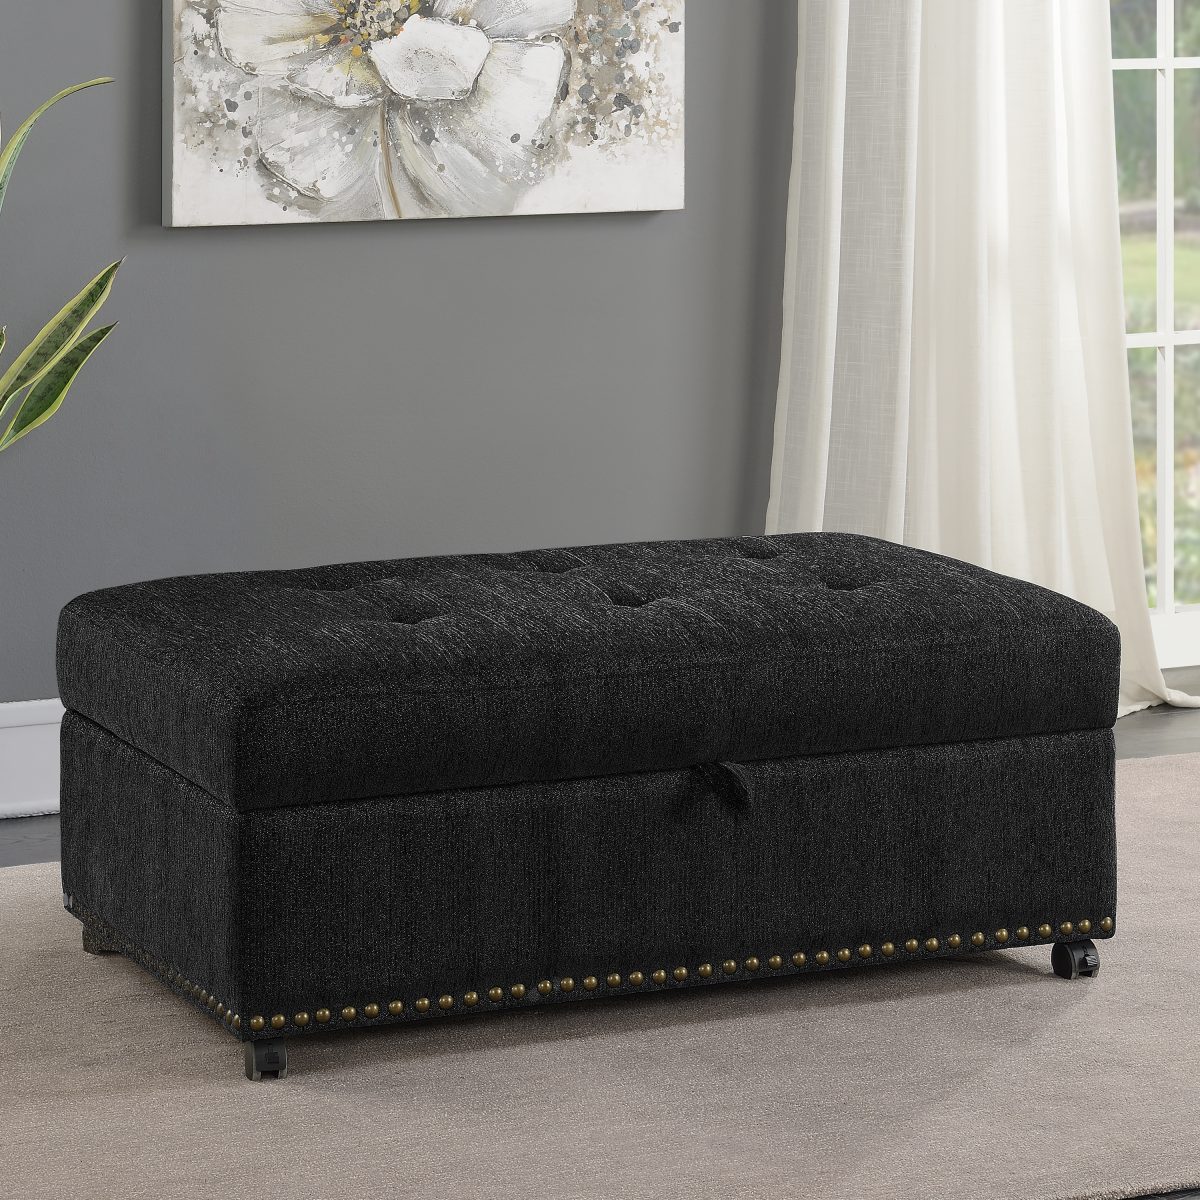  Mainstays Pull Out Sleeper Ottoman in Black 